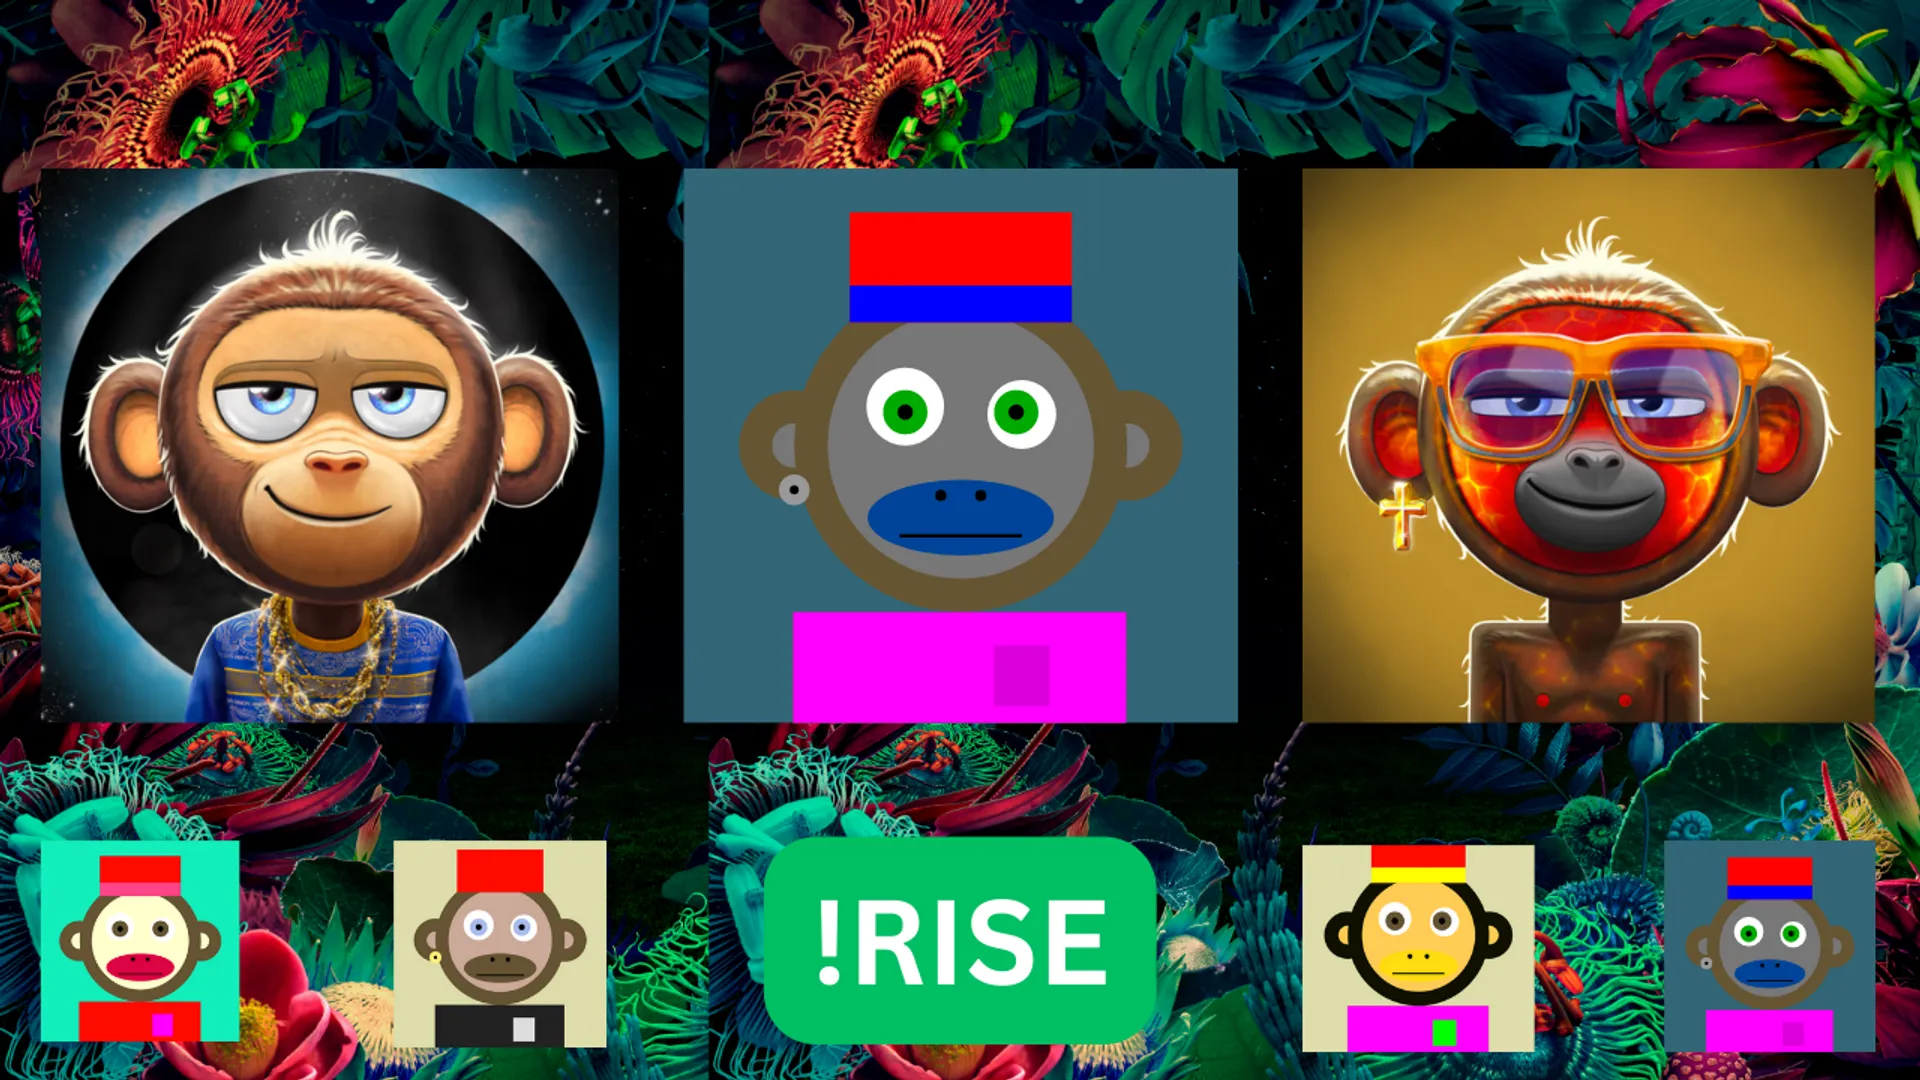 Our OnChainMonkey fam continues to grow w/these new little monkeys 🐒🐒 to help complete our fourth set! 🌴!RISE🌴 

It's wonderful being part of a #web3 community that is doing well by doing good! See other OCM and MetaGood projects here 🌴🐵 https://onchainmonkey.com/news